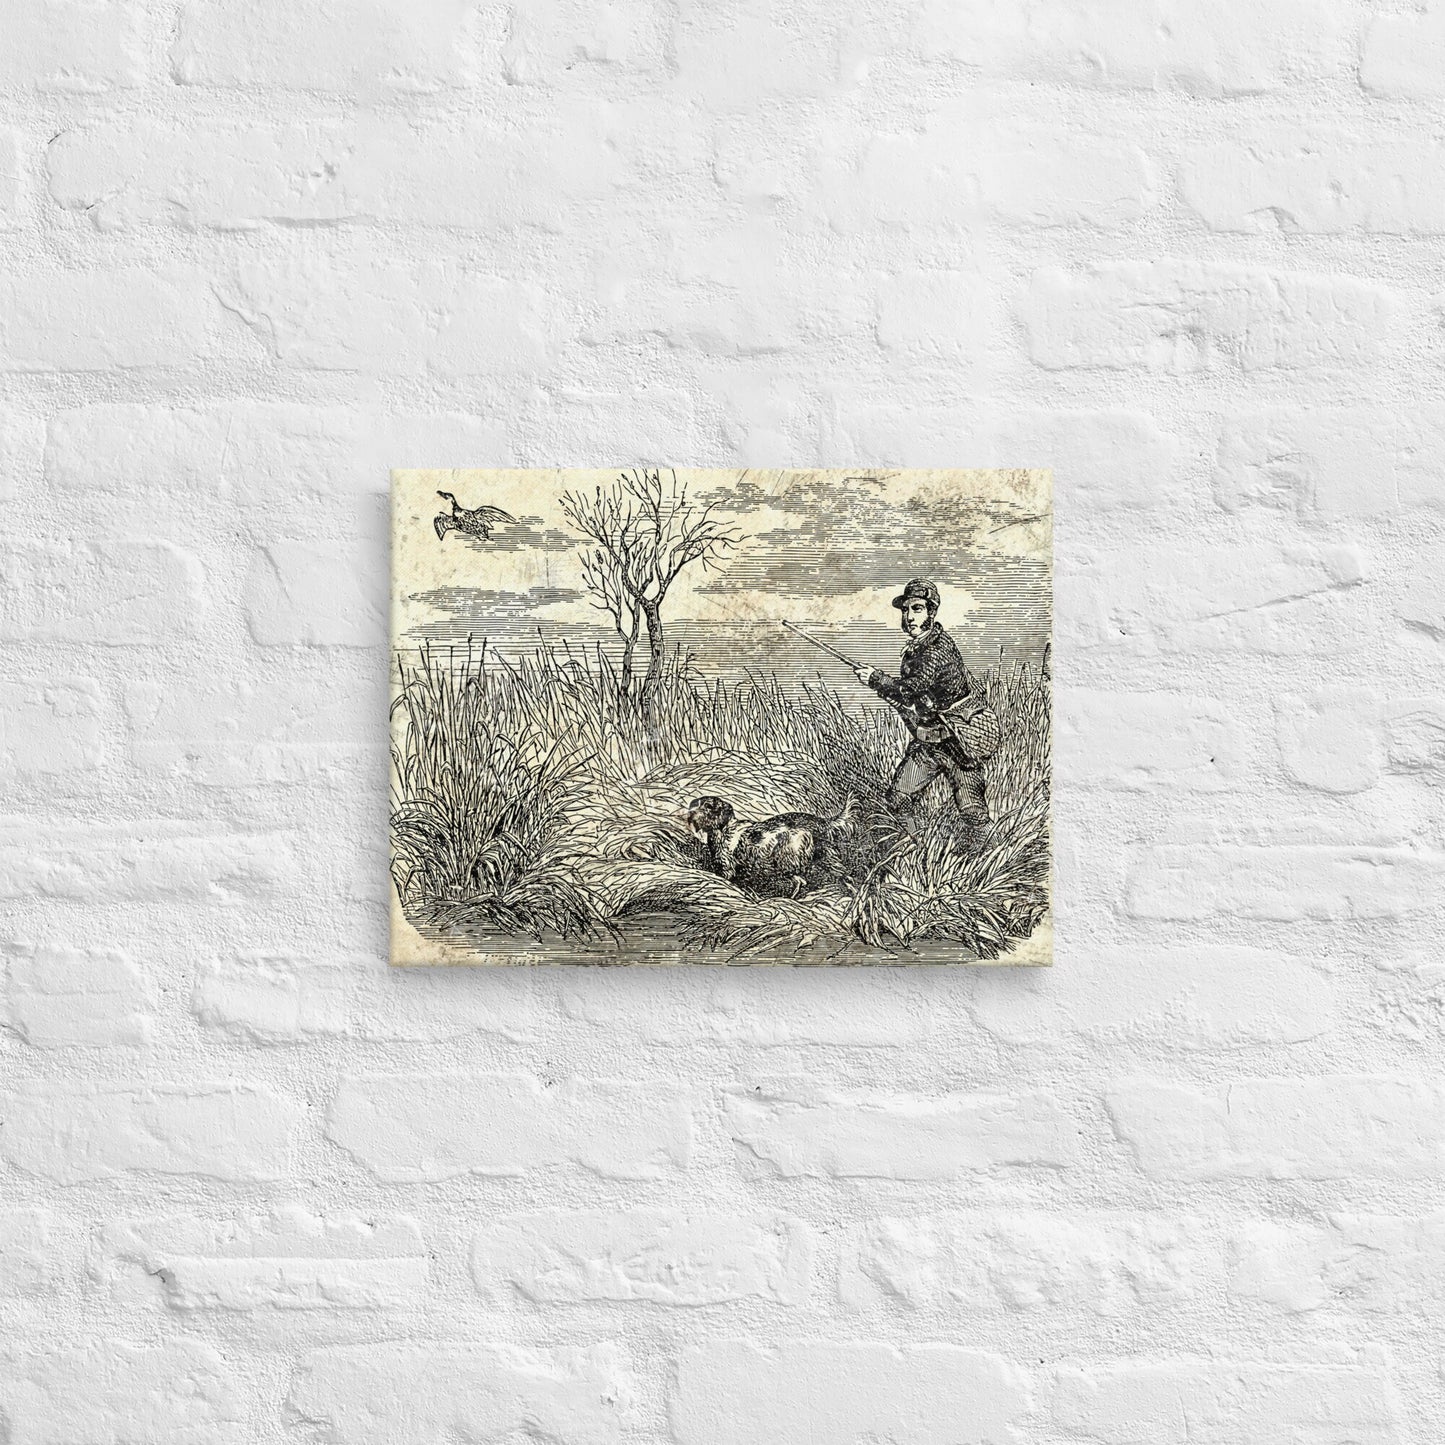 Duck Hunting Waterfowl Vintage Etched Style Distressed Art Wall Stretched Canvas Retro Hunting Dog Wall Decor for Hunters